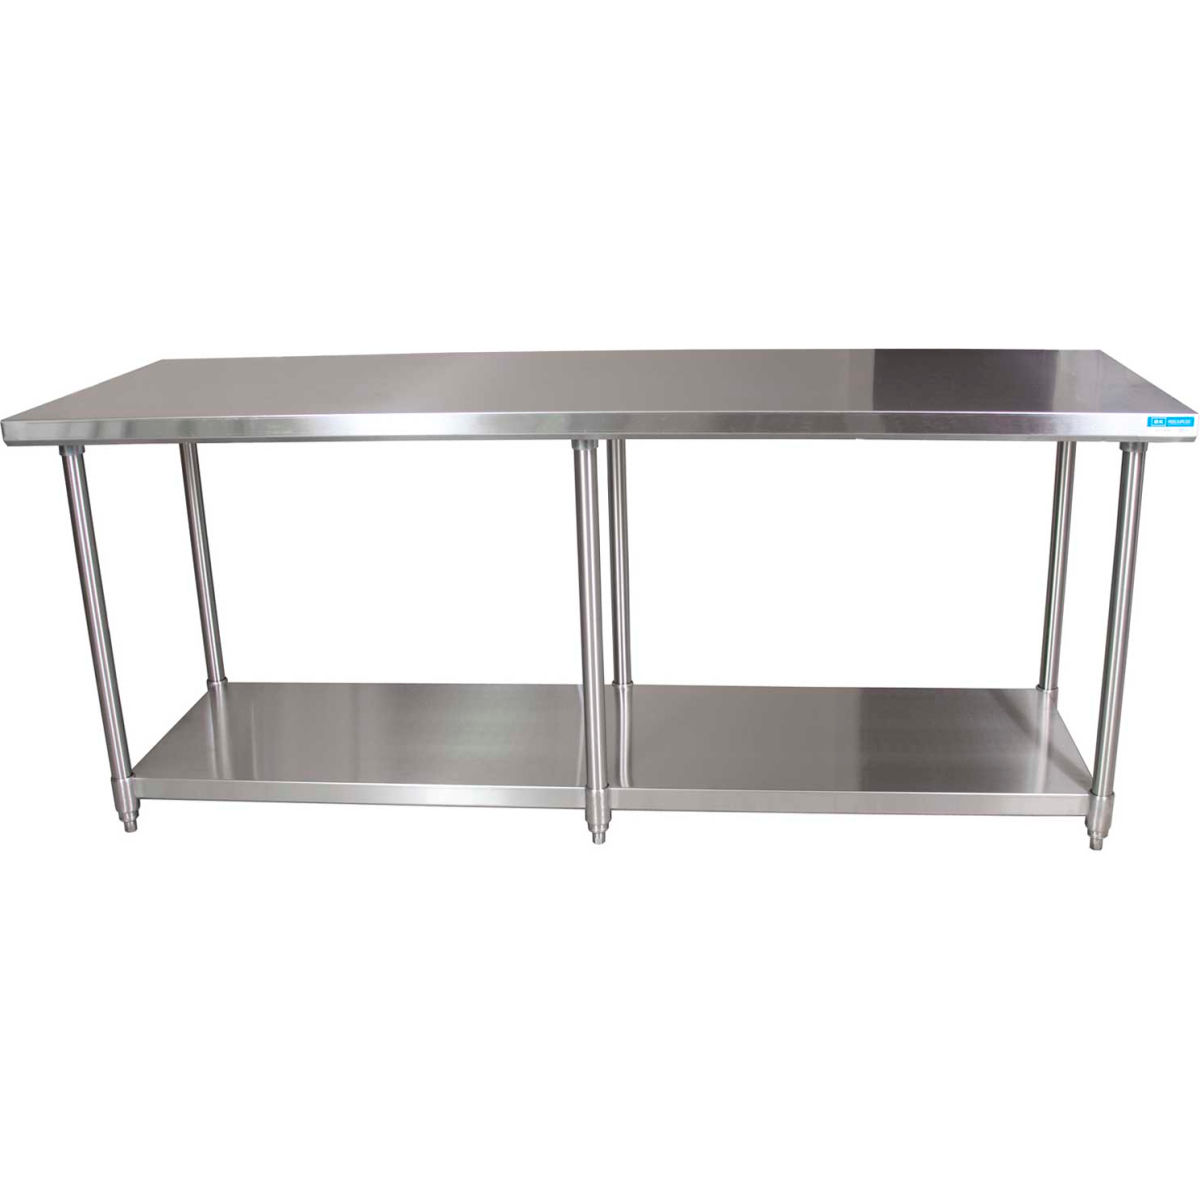 Picture of BK Resources B1516219 16 Gauge 304 Series Stainless Workbench with Adjustable Undershelf - 96 x 30 in.